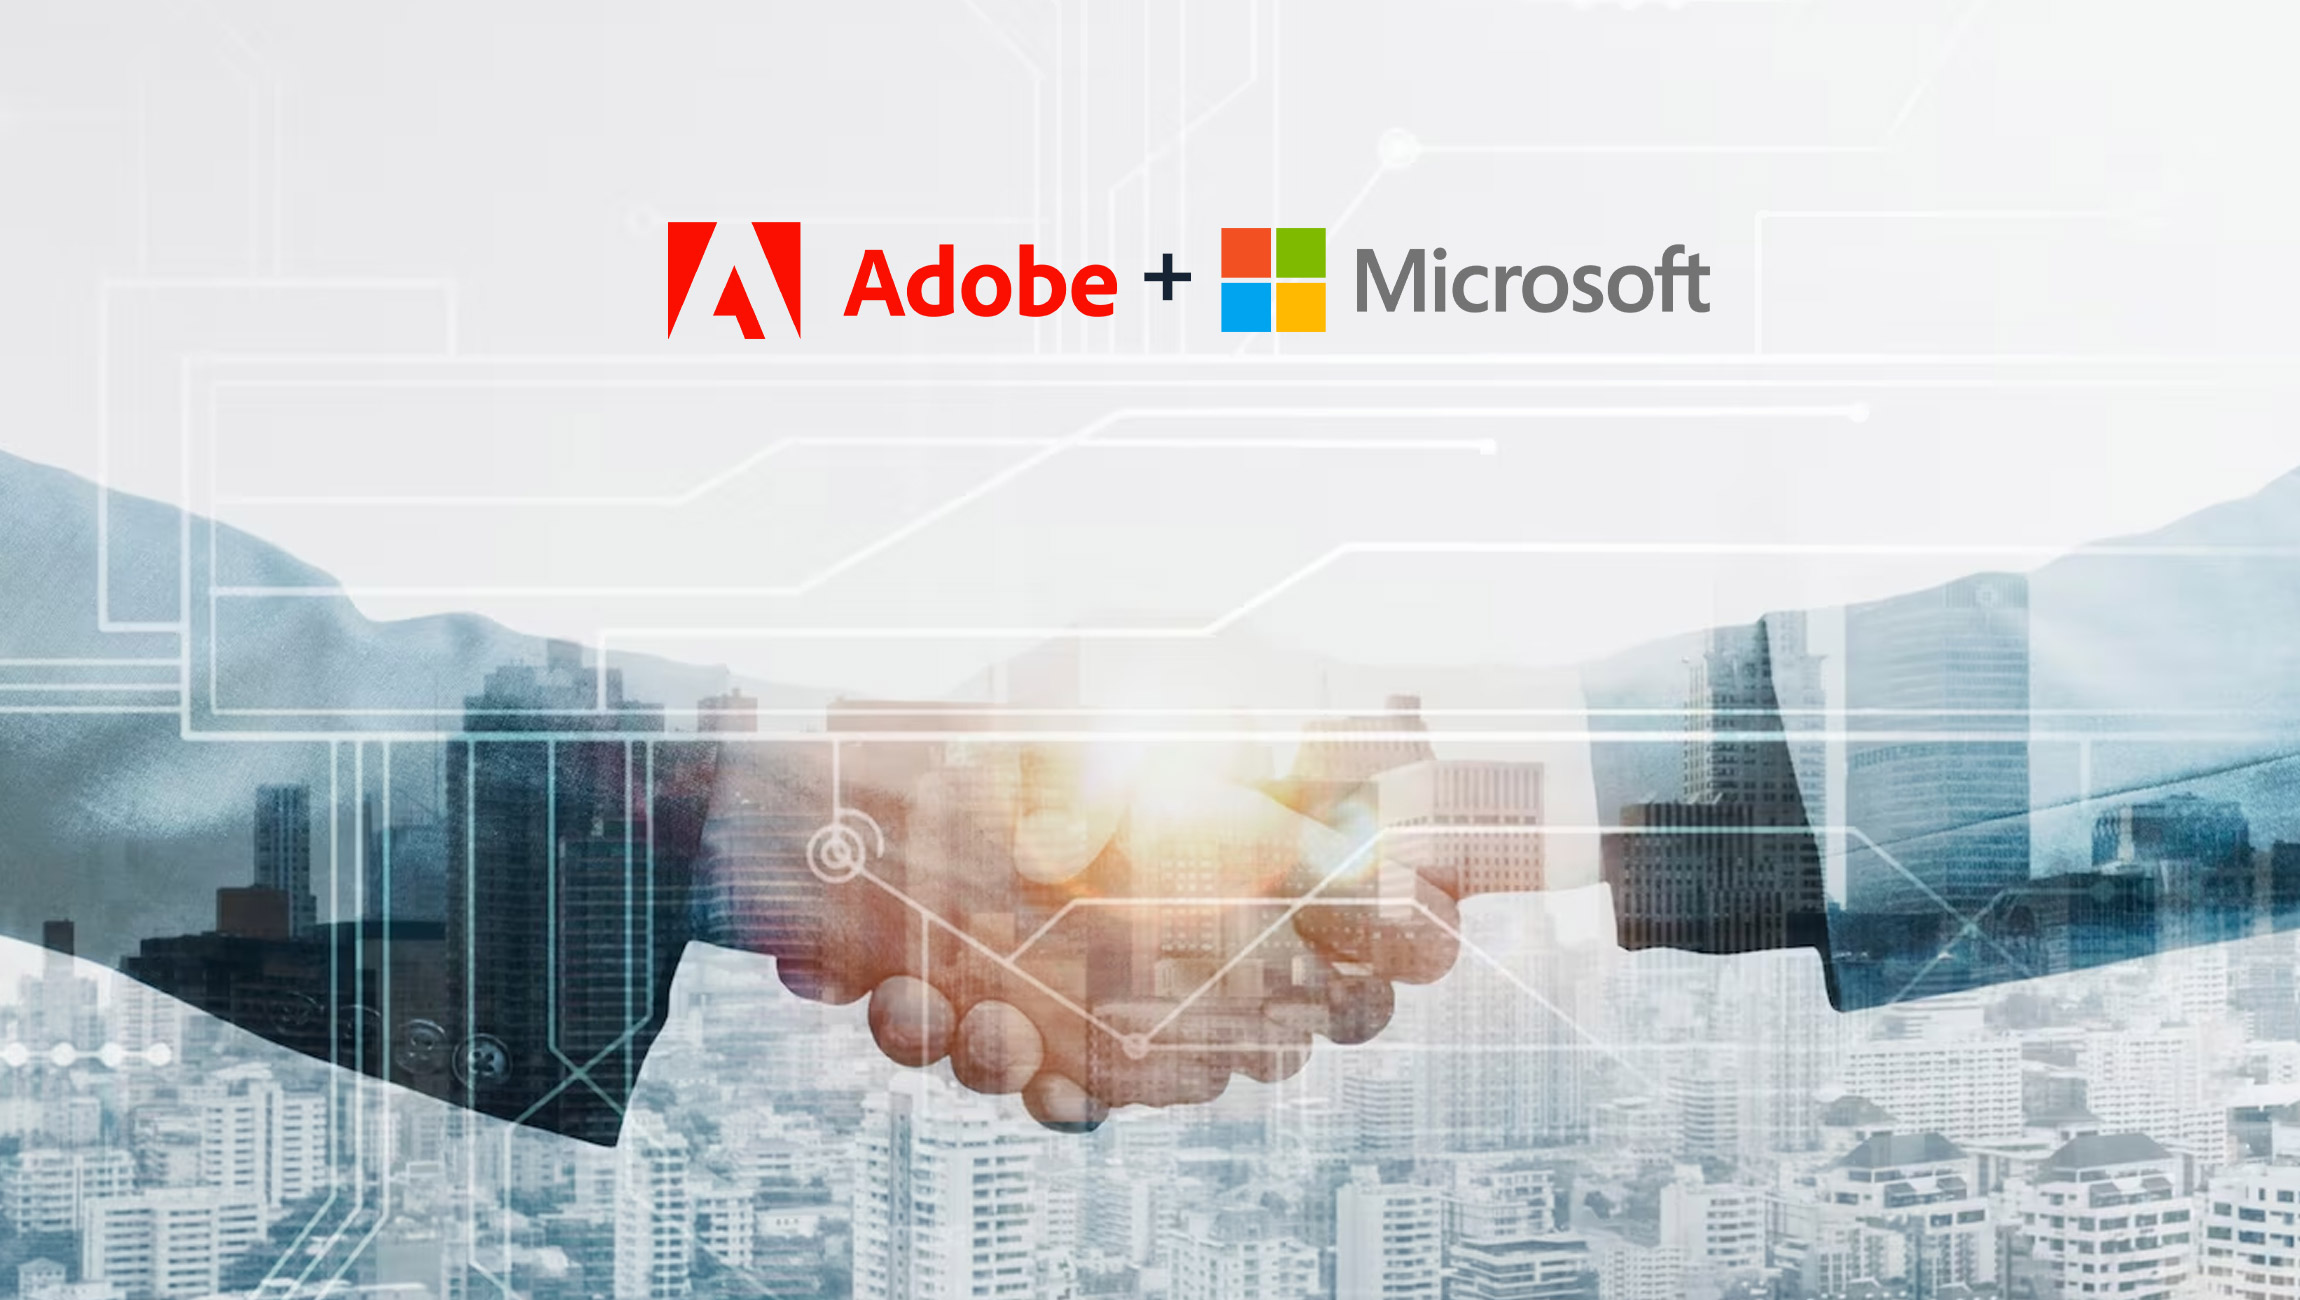 Adobe And Microsoft Partner to Bring New Generative AI Capabilities to Marketers as They Work in Microsoft 365 Applications